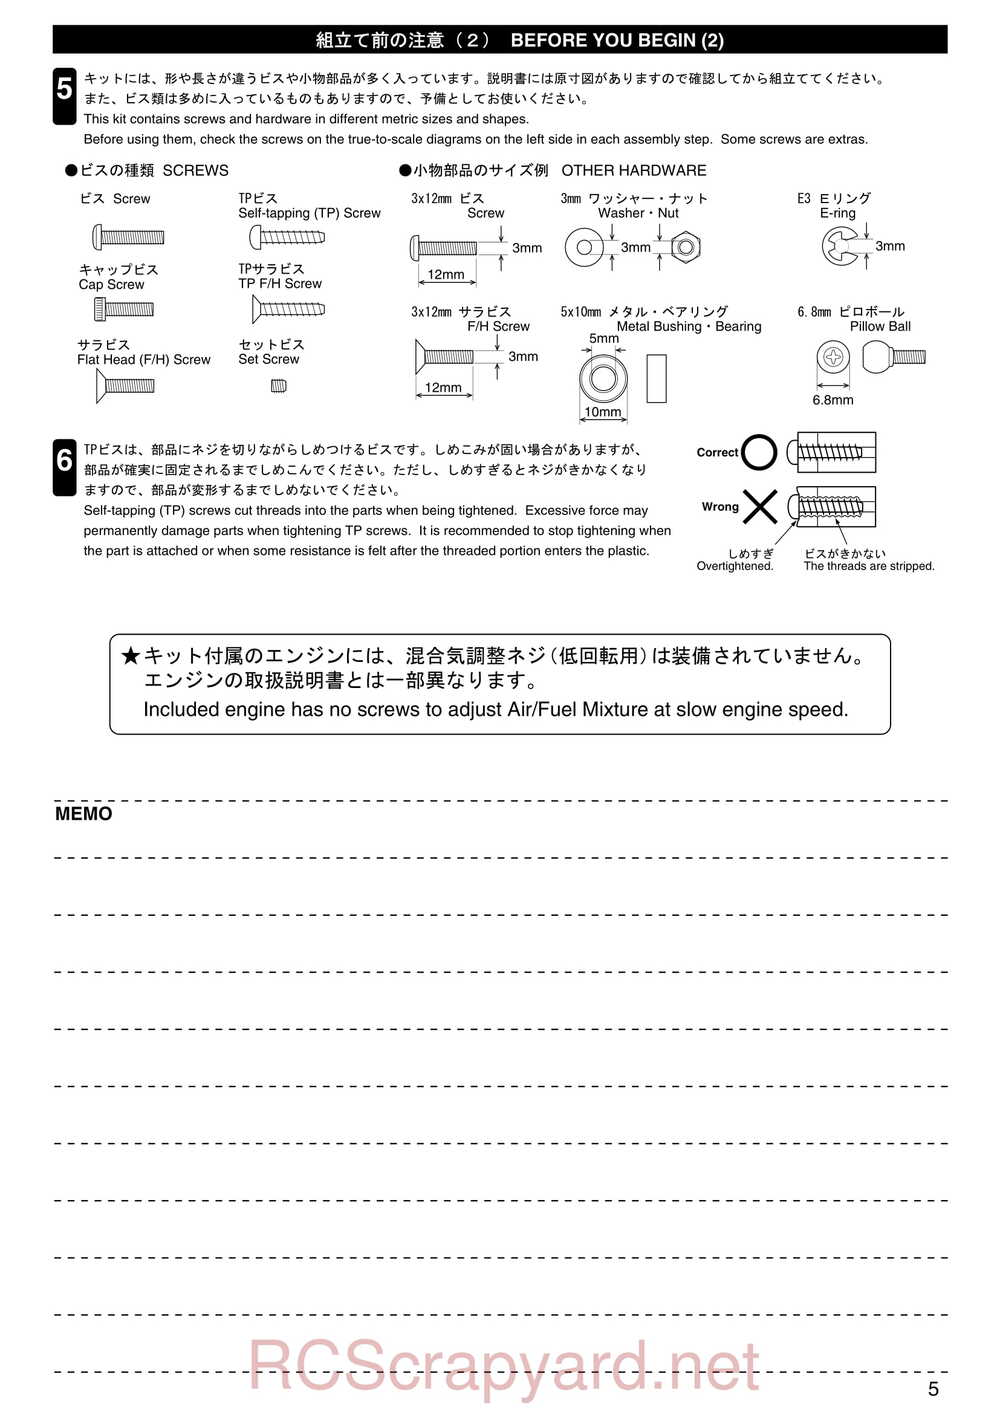 Kyosho - 31091 - Inferno-TR15 - Manual - Page 05